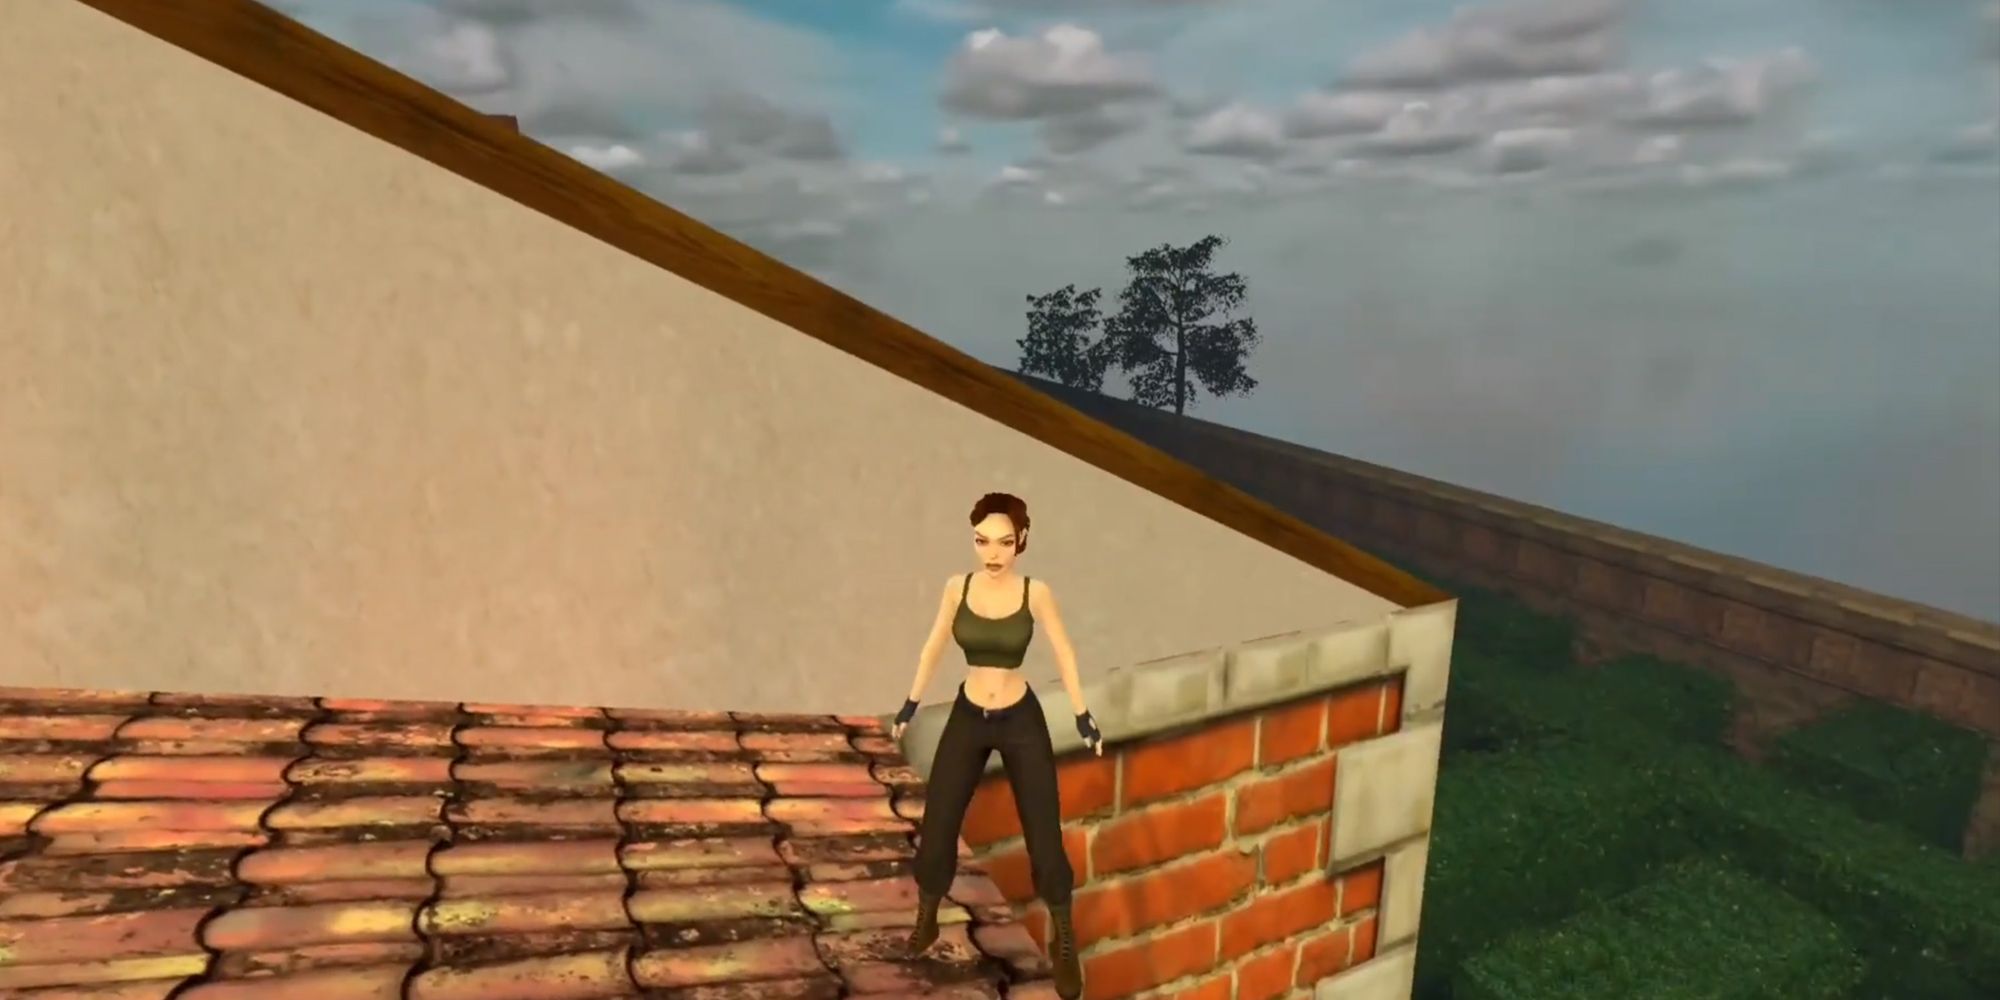 Lara Croft standing on the manor roof in Tomb Raider remastered